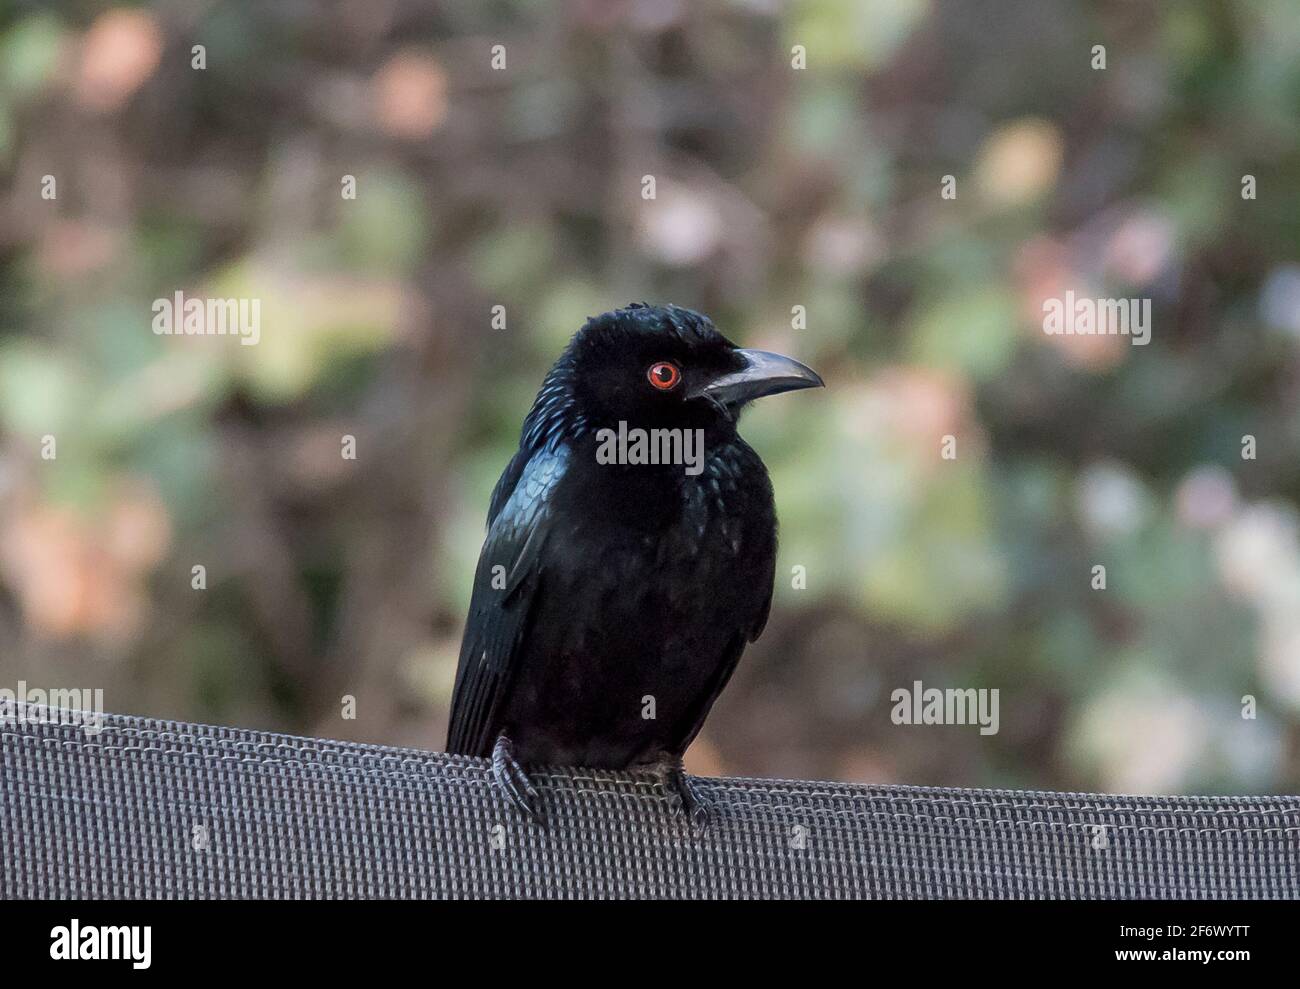 Australian Spangled drongo, Dicrurus bracteatus, perched on a garden chair in spring time, Queensland Shiny, black, migrant bird with bright red eyes. Stock Photo